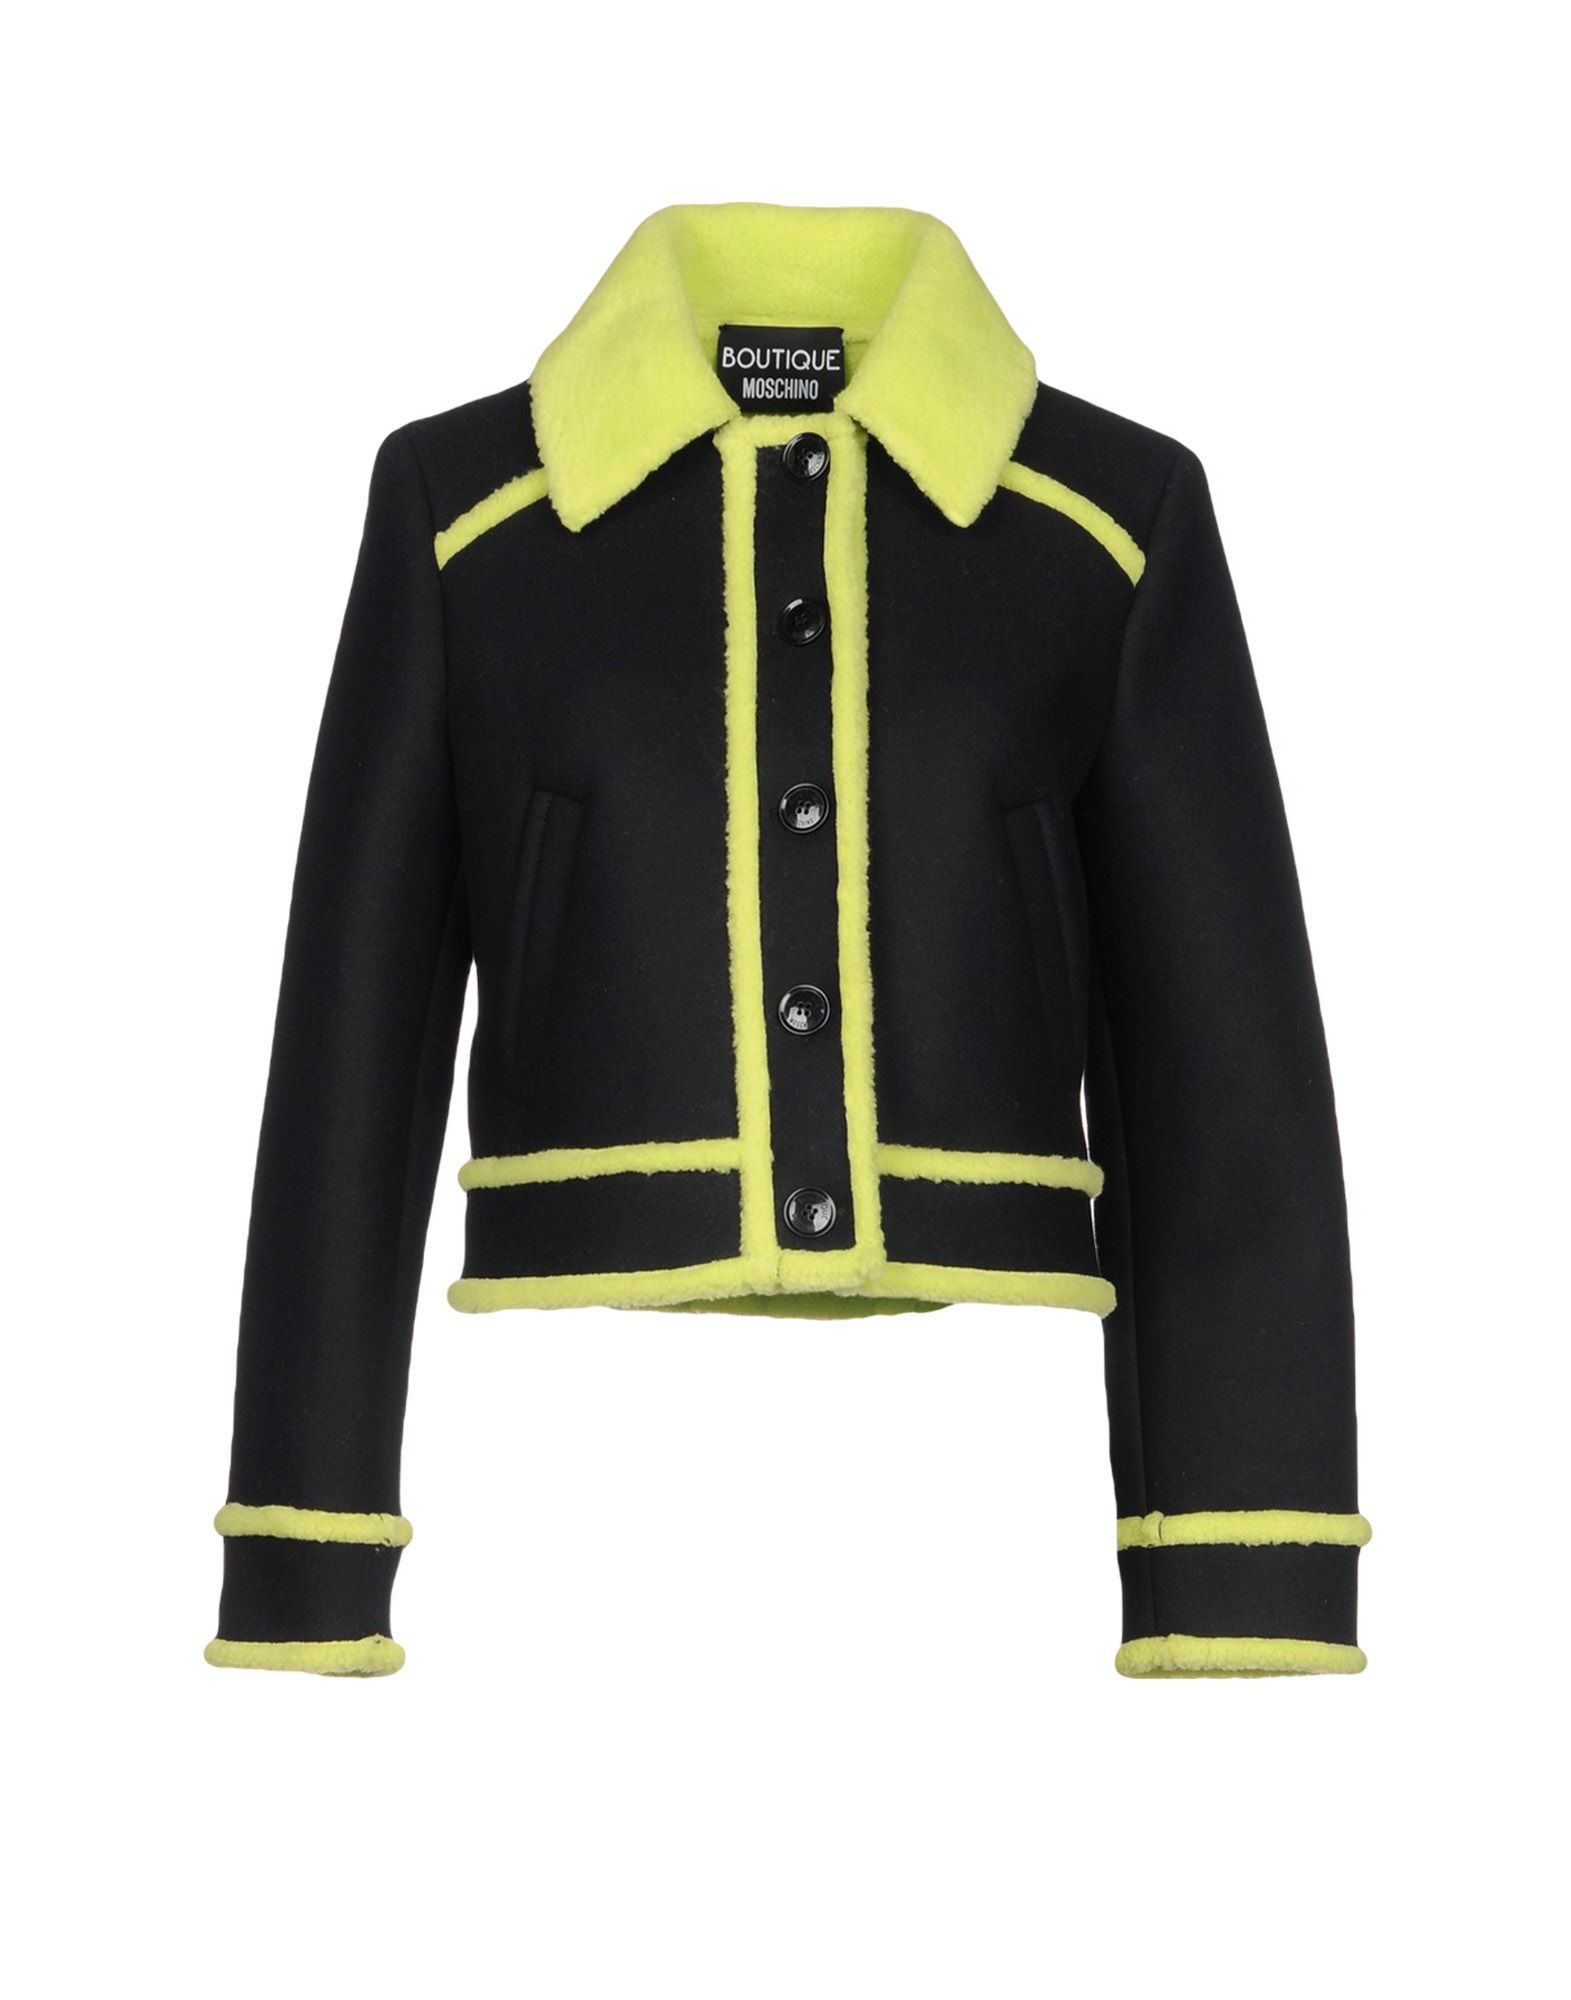 BOUTIQUE MOSCHINO JACKETS,41788649OR 5